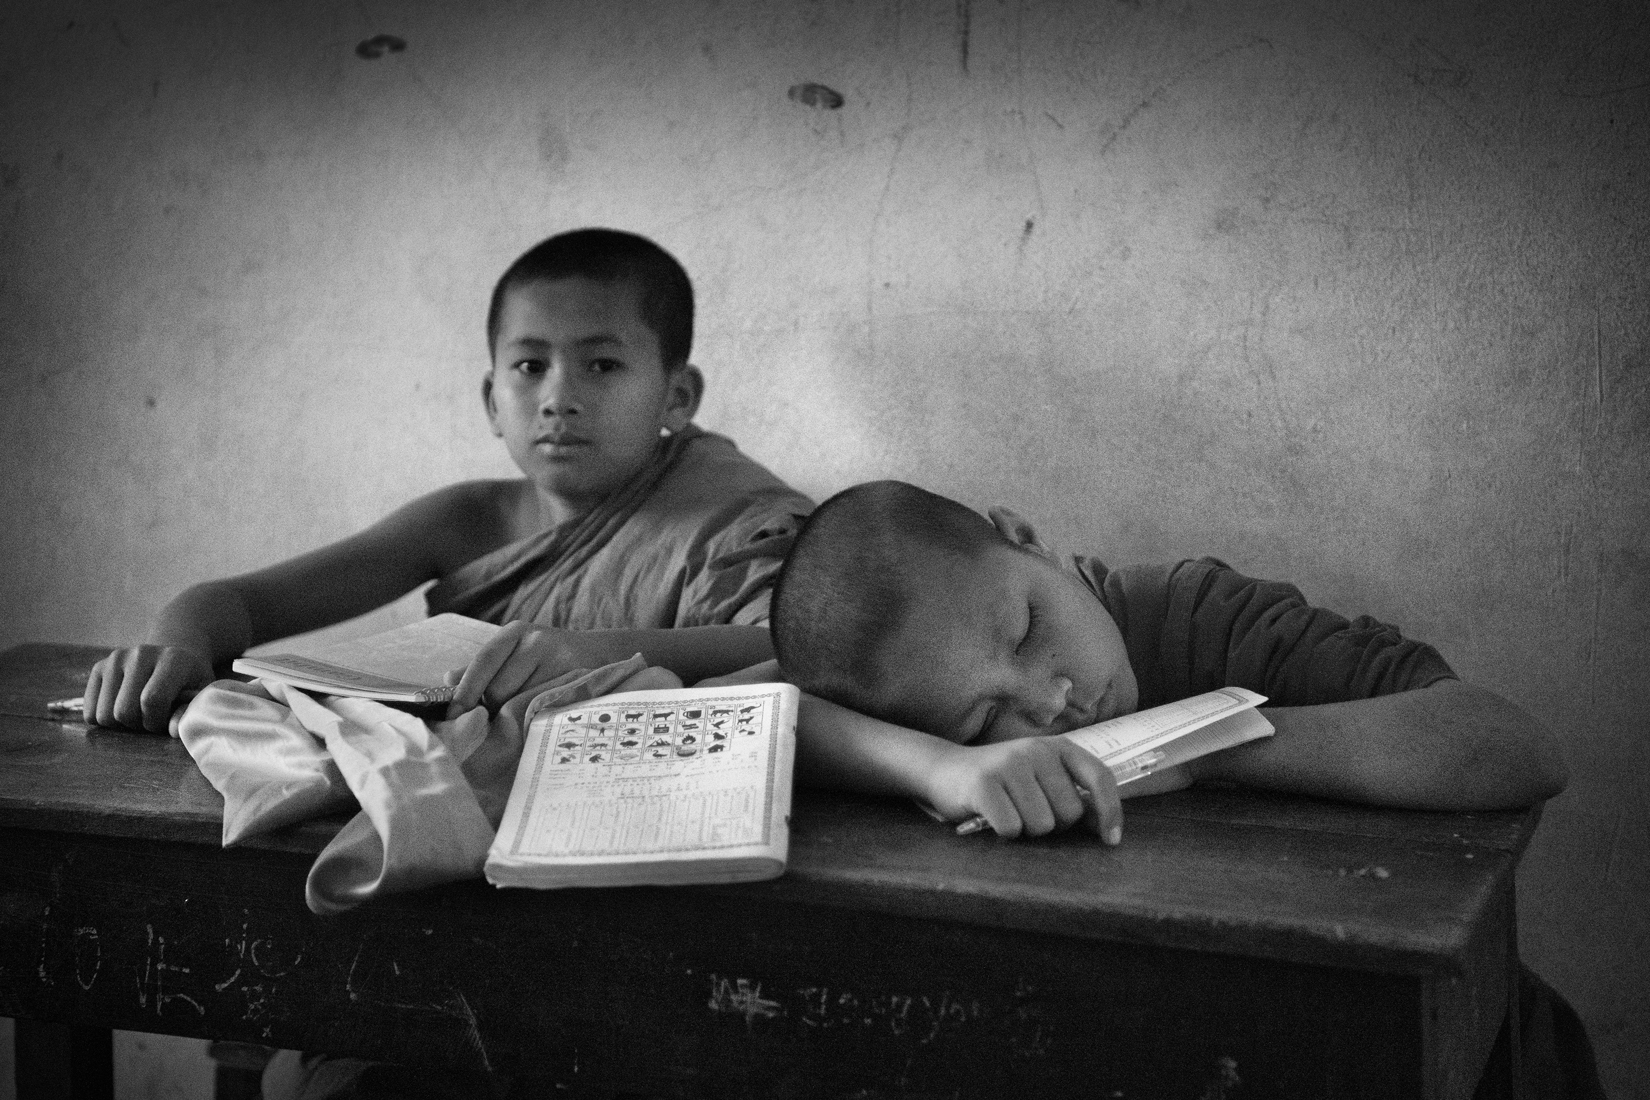 a boy sleeping on a desk next to another boy